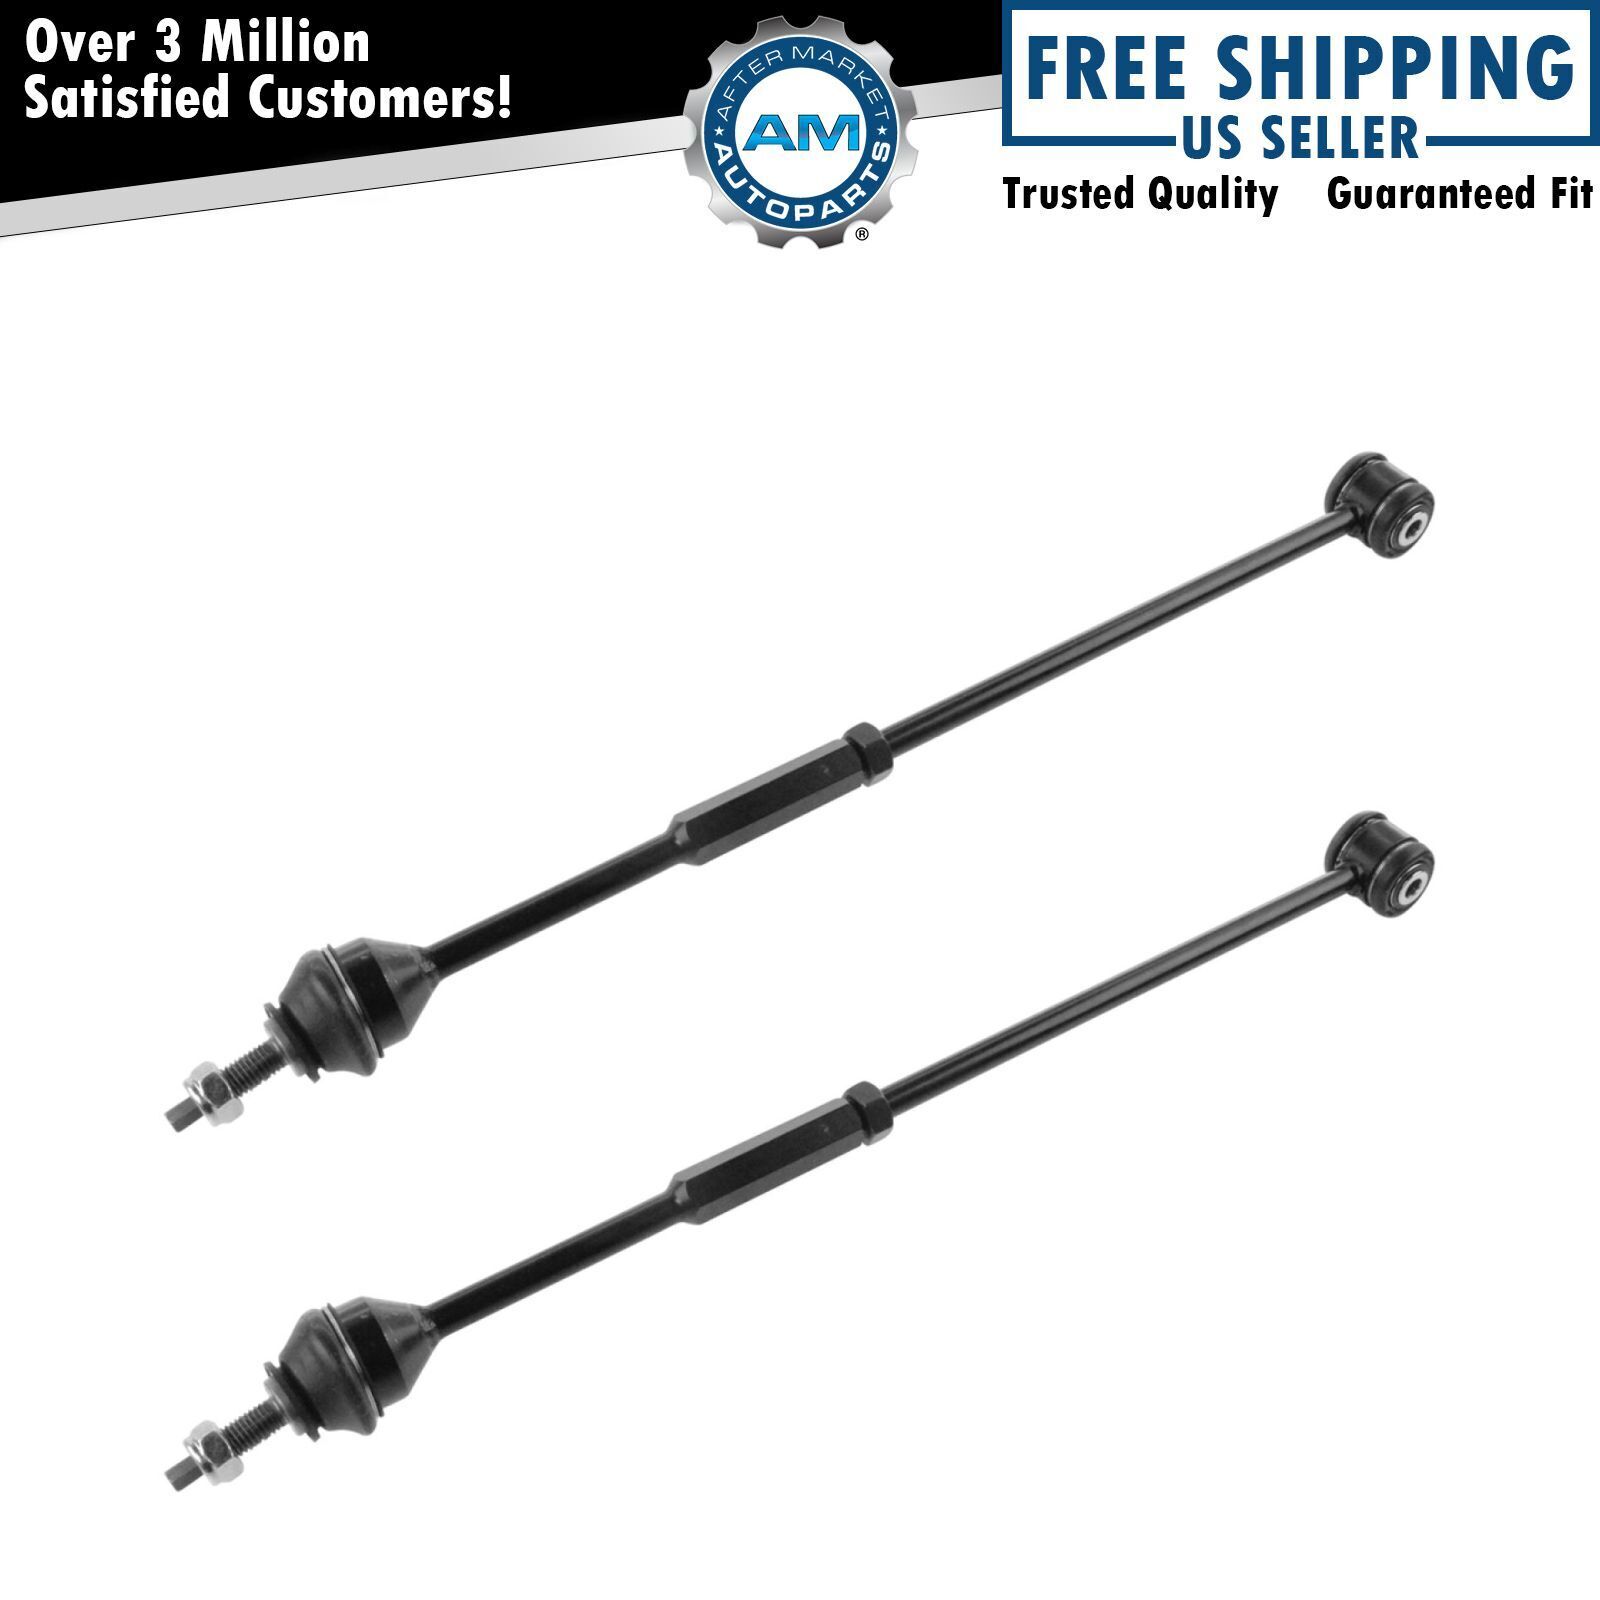 Tie Rod Rear Pair Set of 2 for F-Type S-Type XF XFR XJ XJL XK XKR XKR-S New